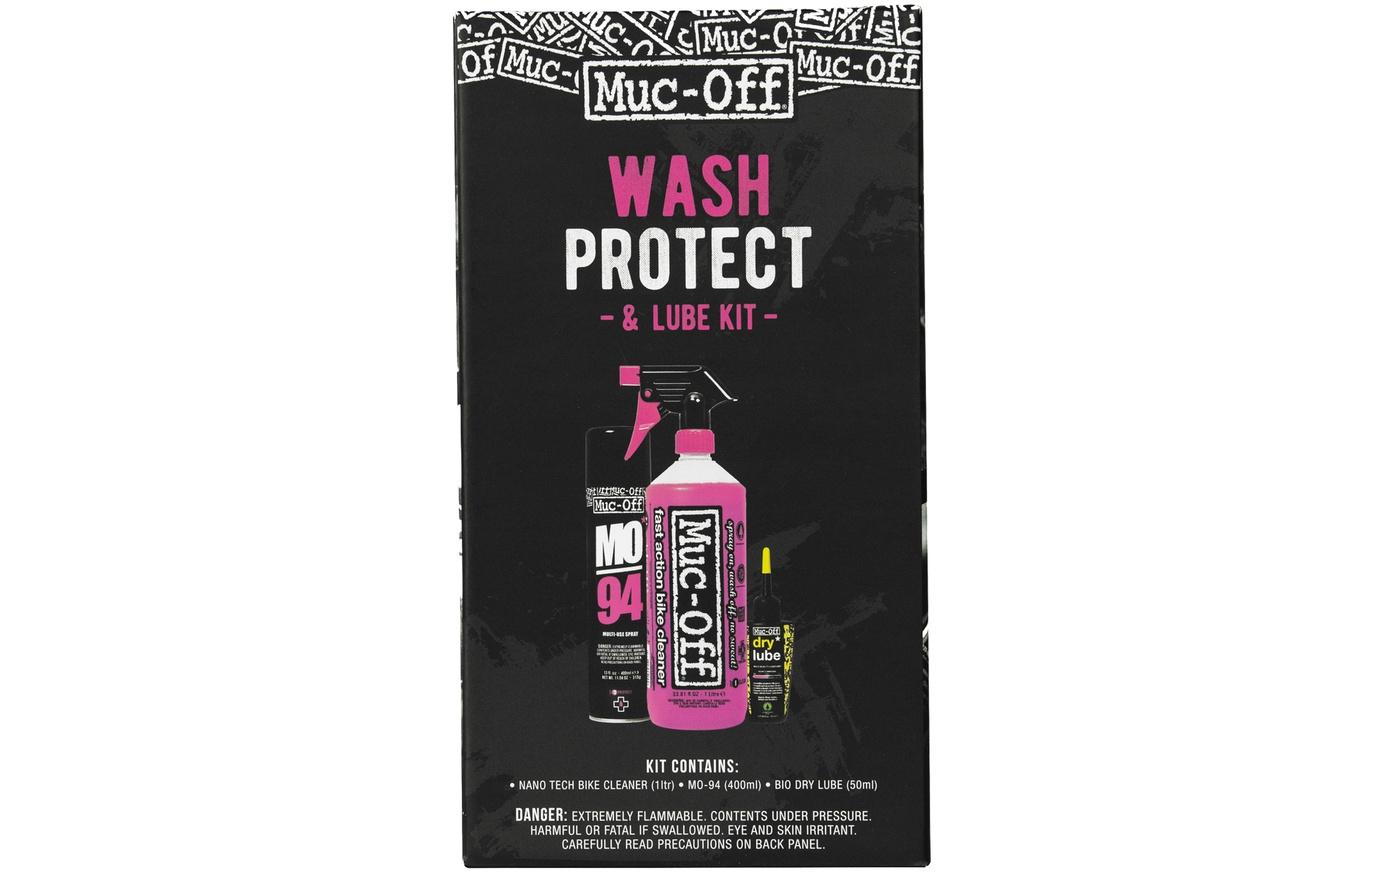 Muc-Off Pflegeset Wash, Protect and Dry Lube Kit